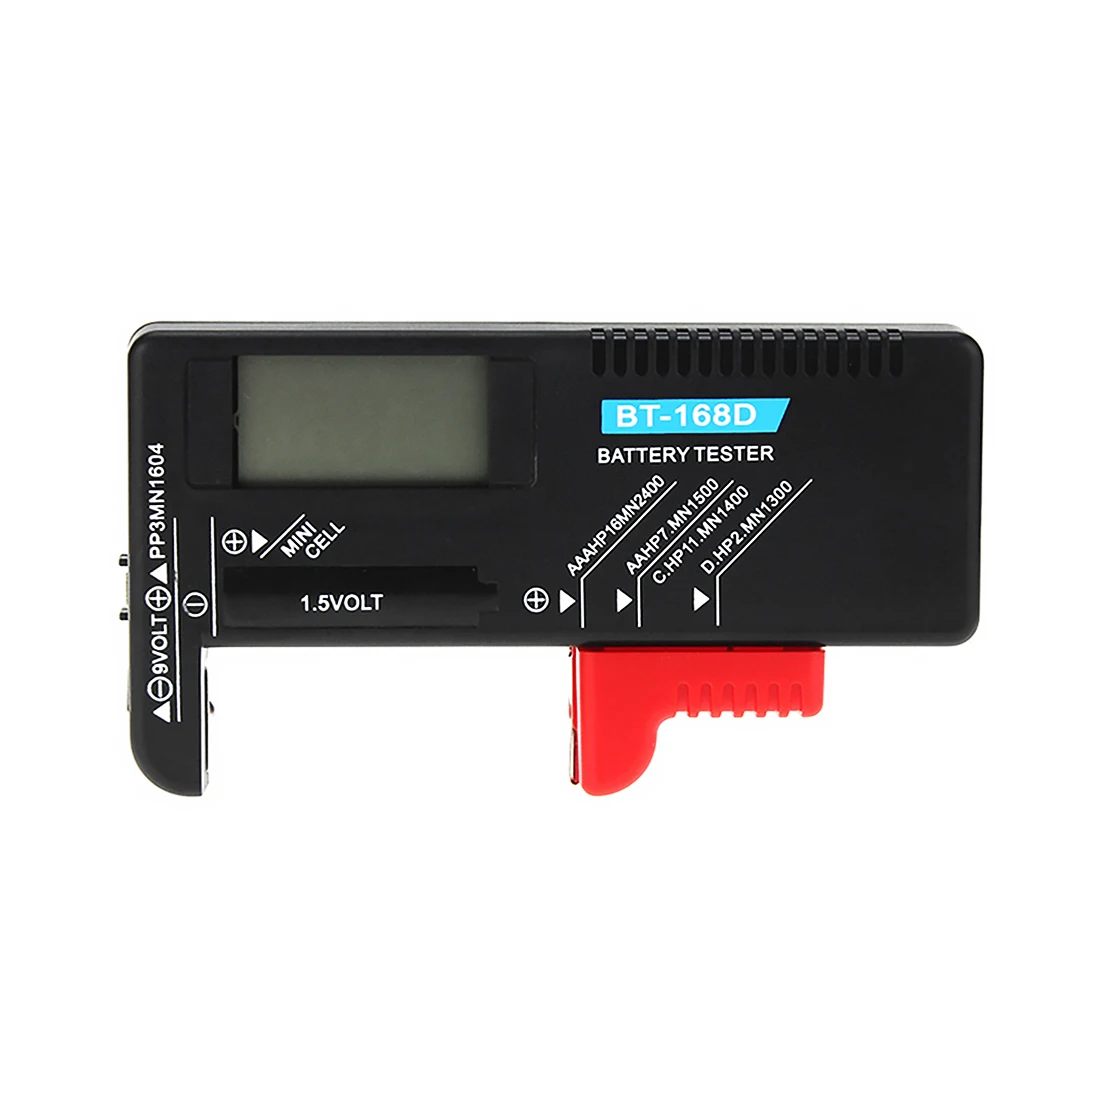 

BT-168 Digital Battery Tester Volt Checker for 9V 1.5V Button Cell Universal Rechargeable AAA AA C D Battery Testing Device